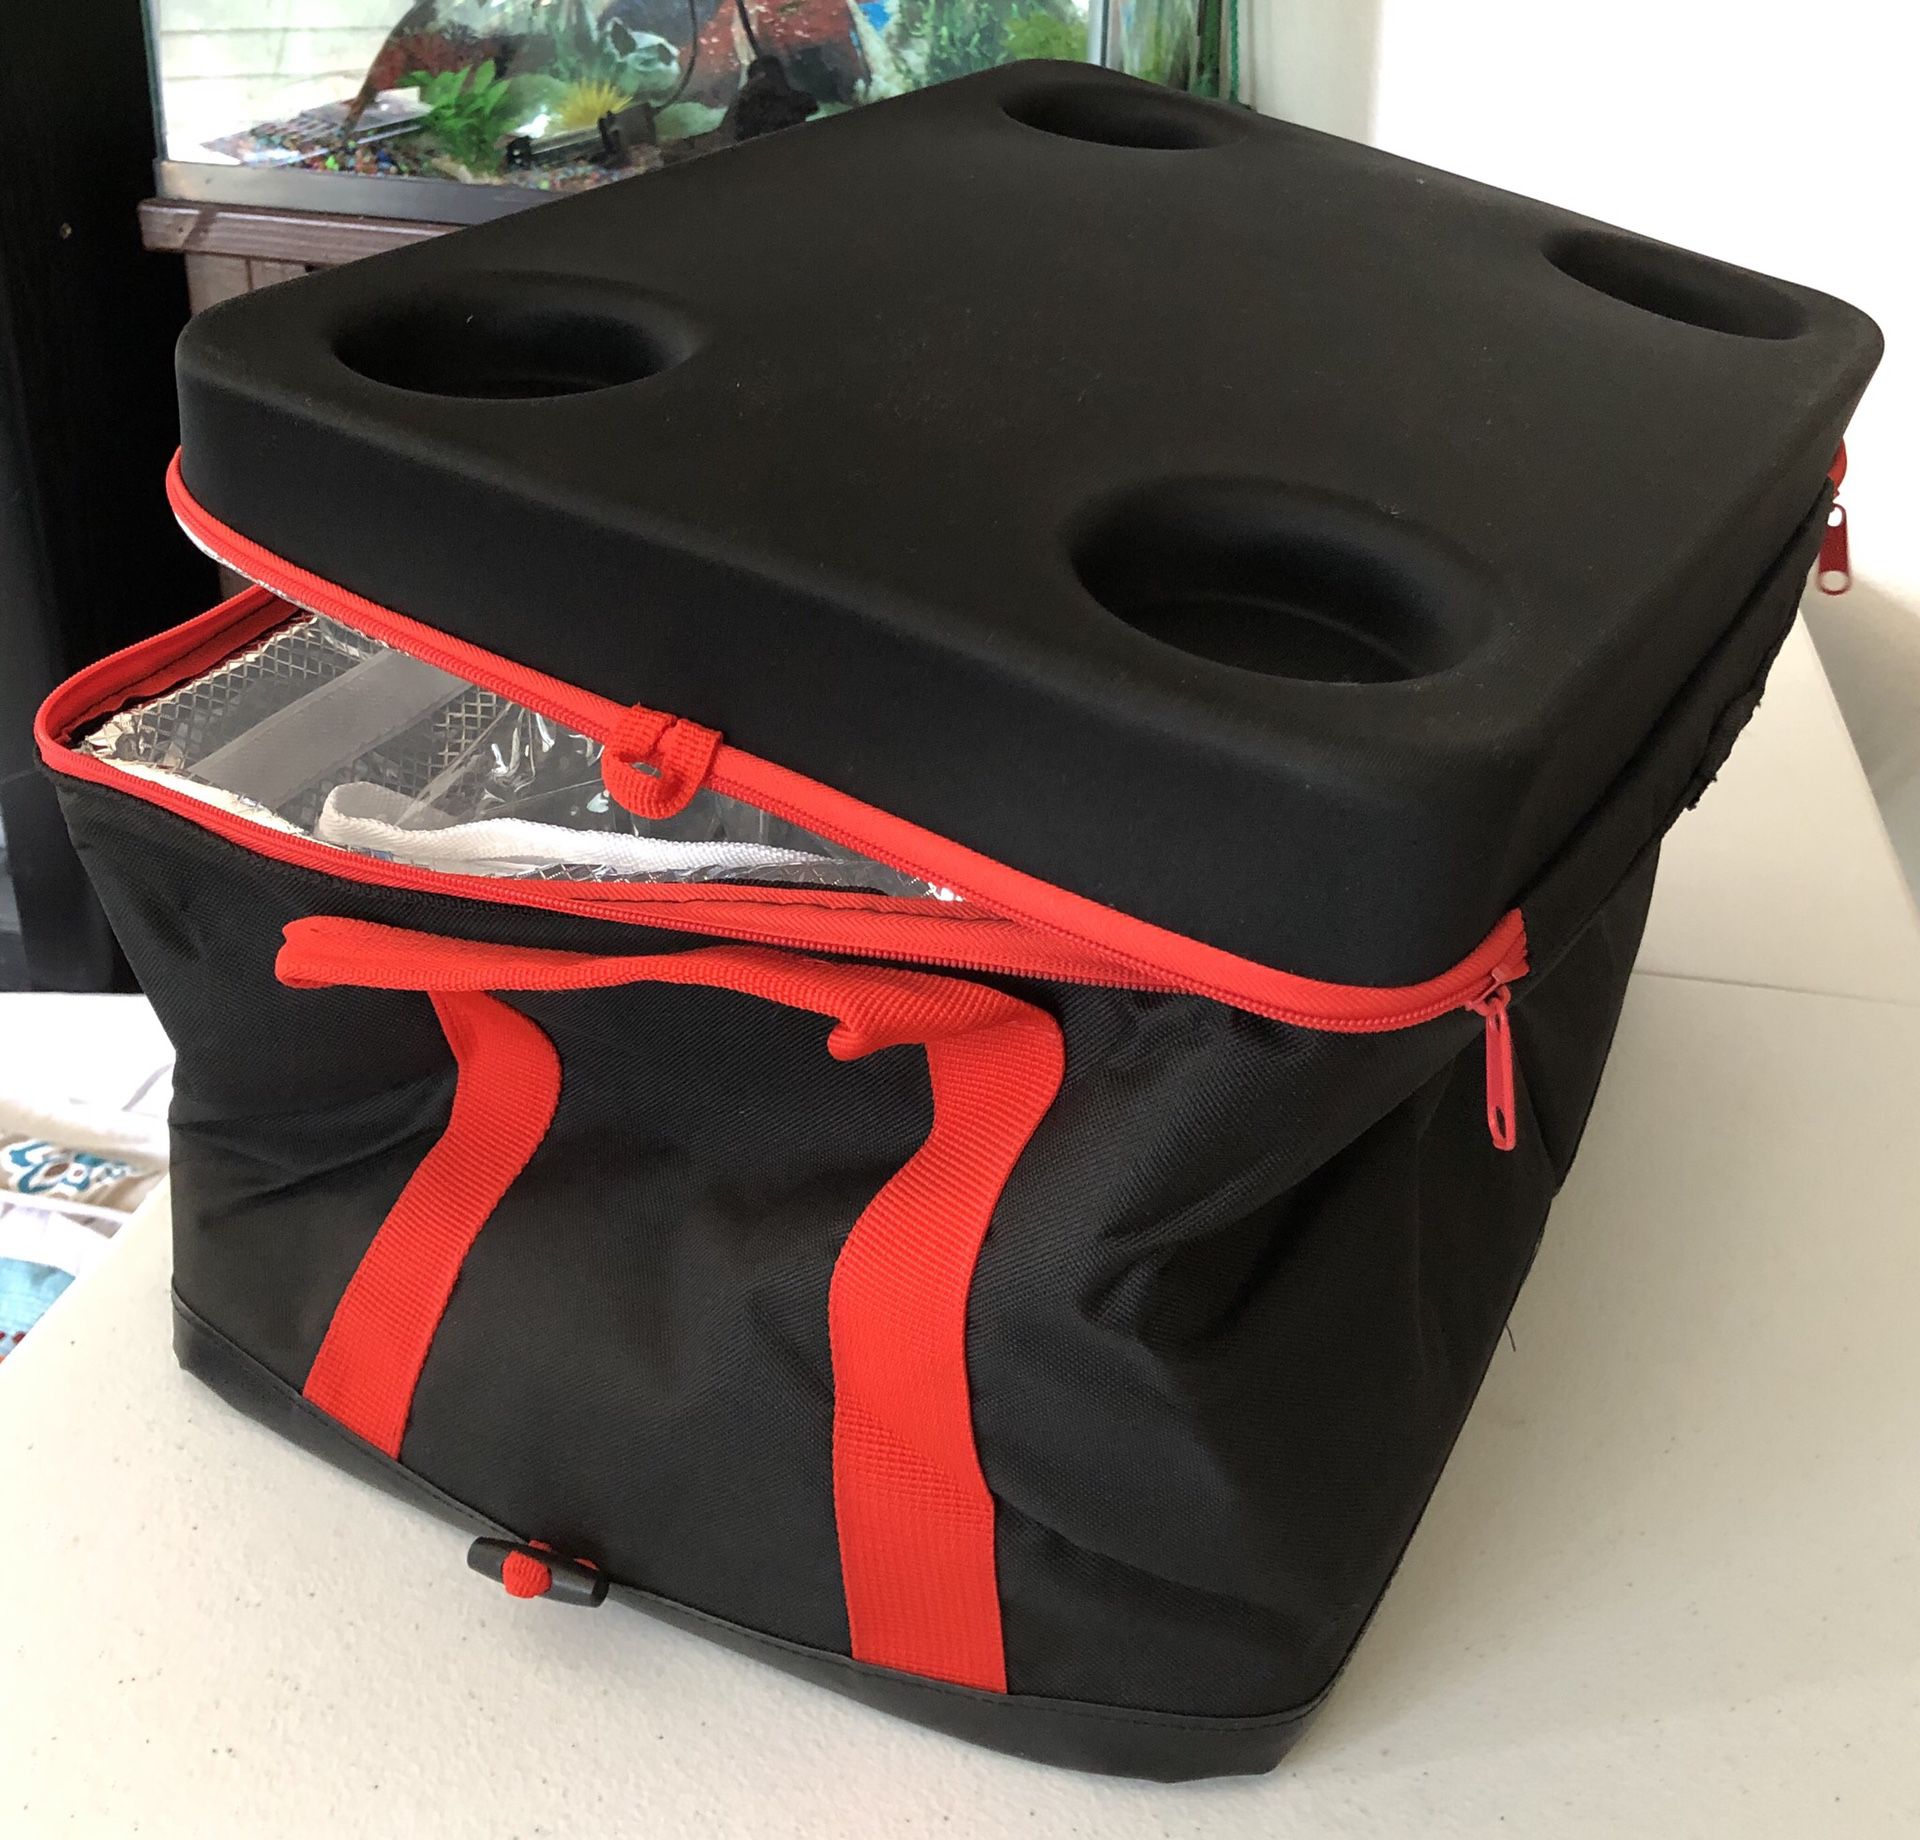 Foldable cooler with 4 cup holder. Never used.